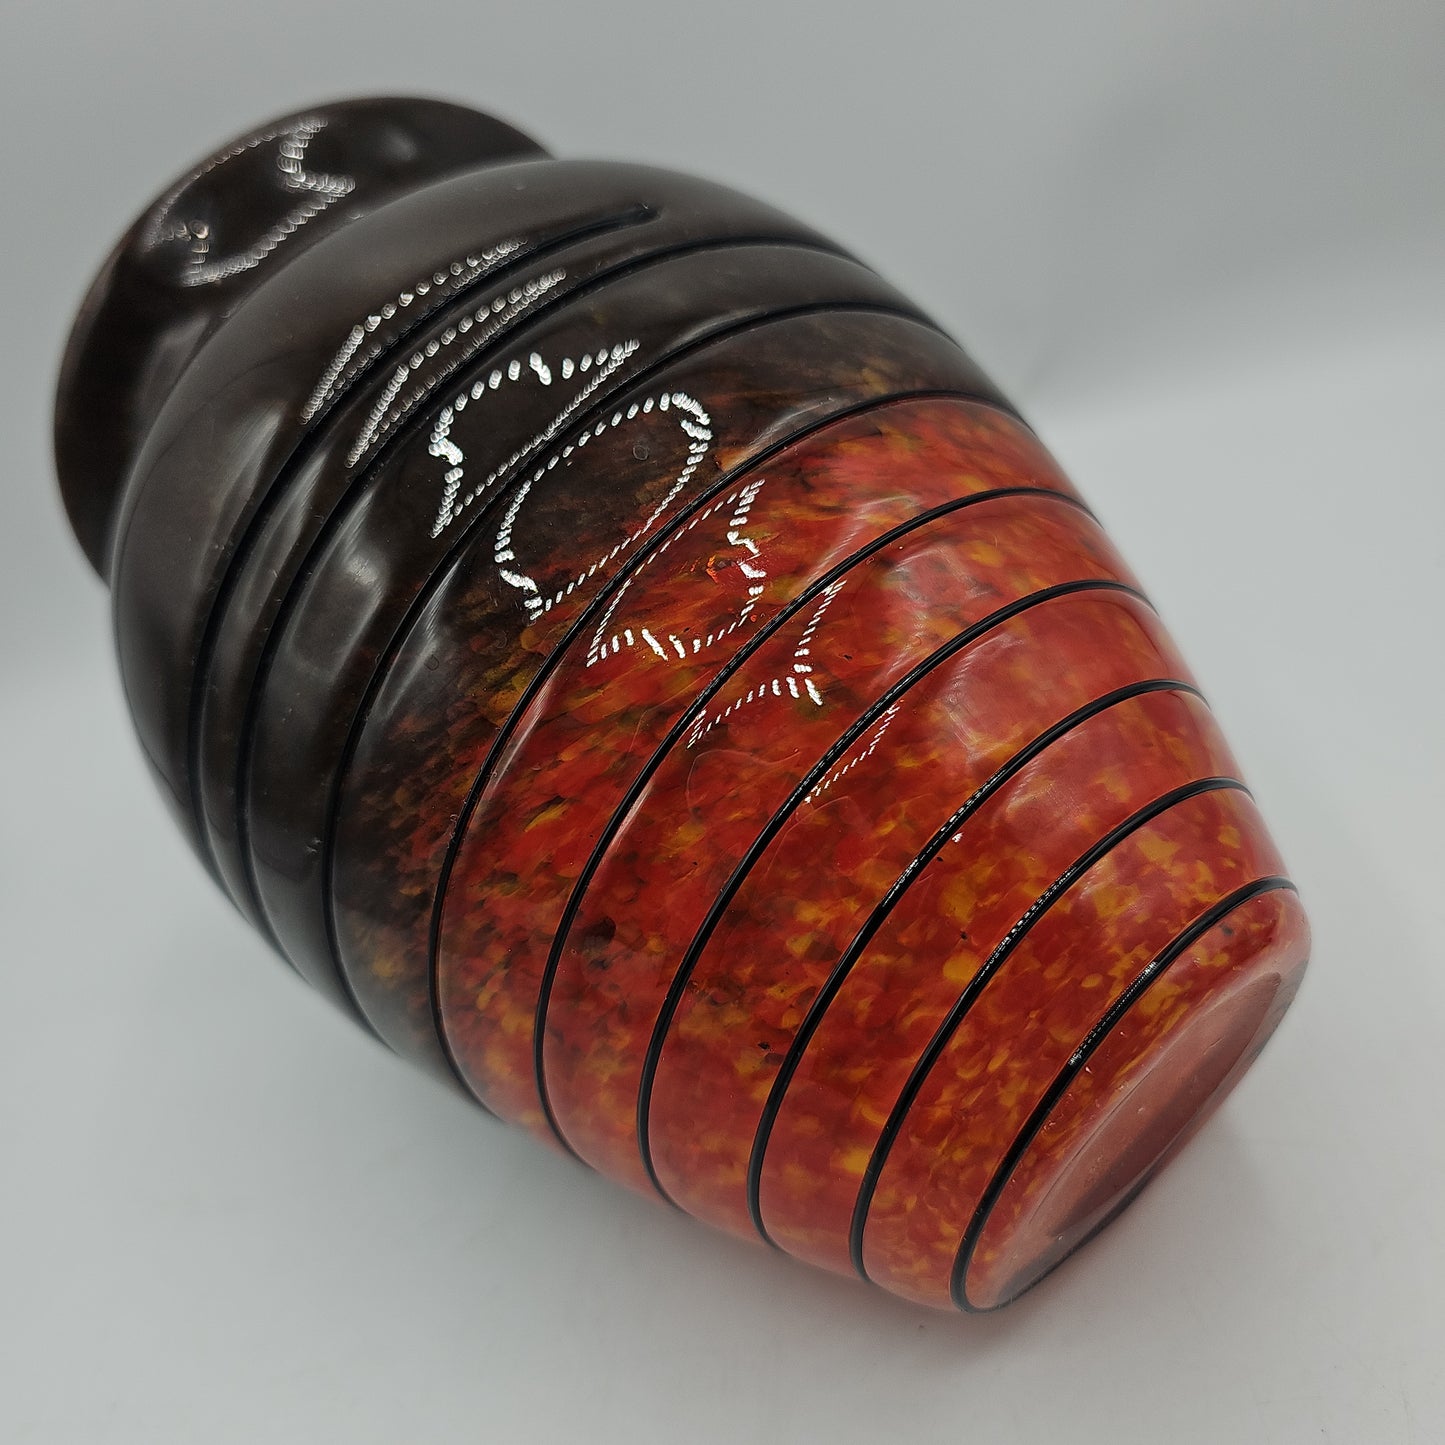 Art Glass Vase with Applied Swirl